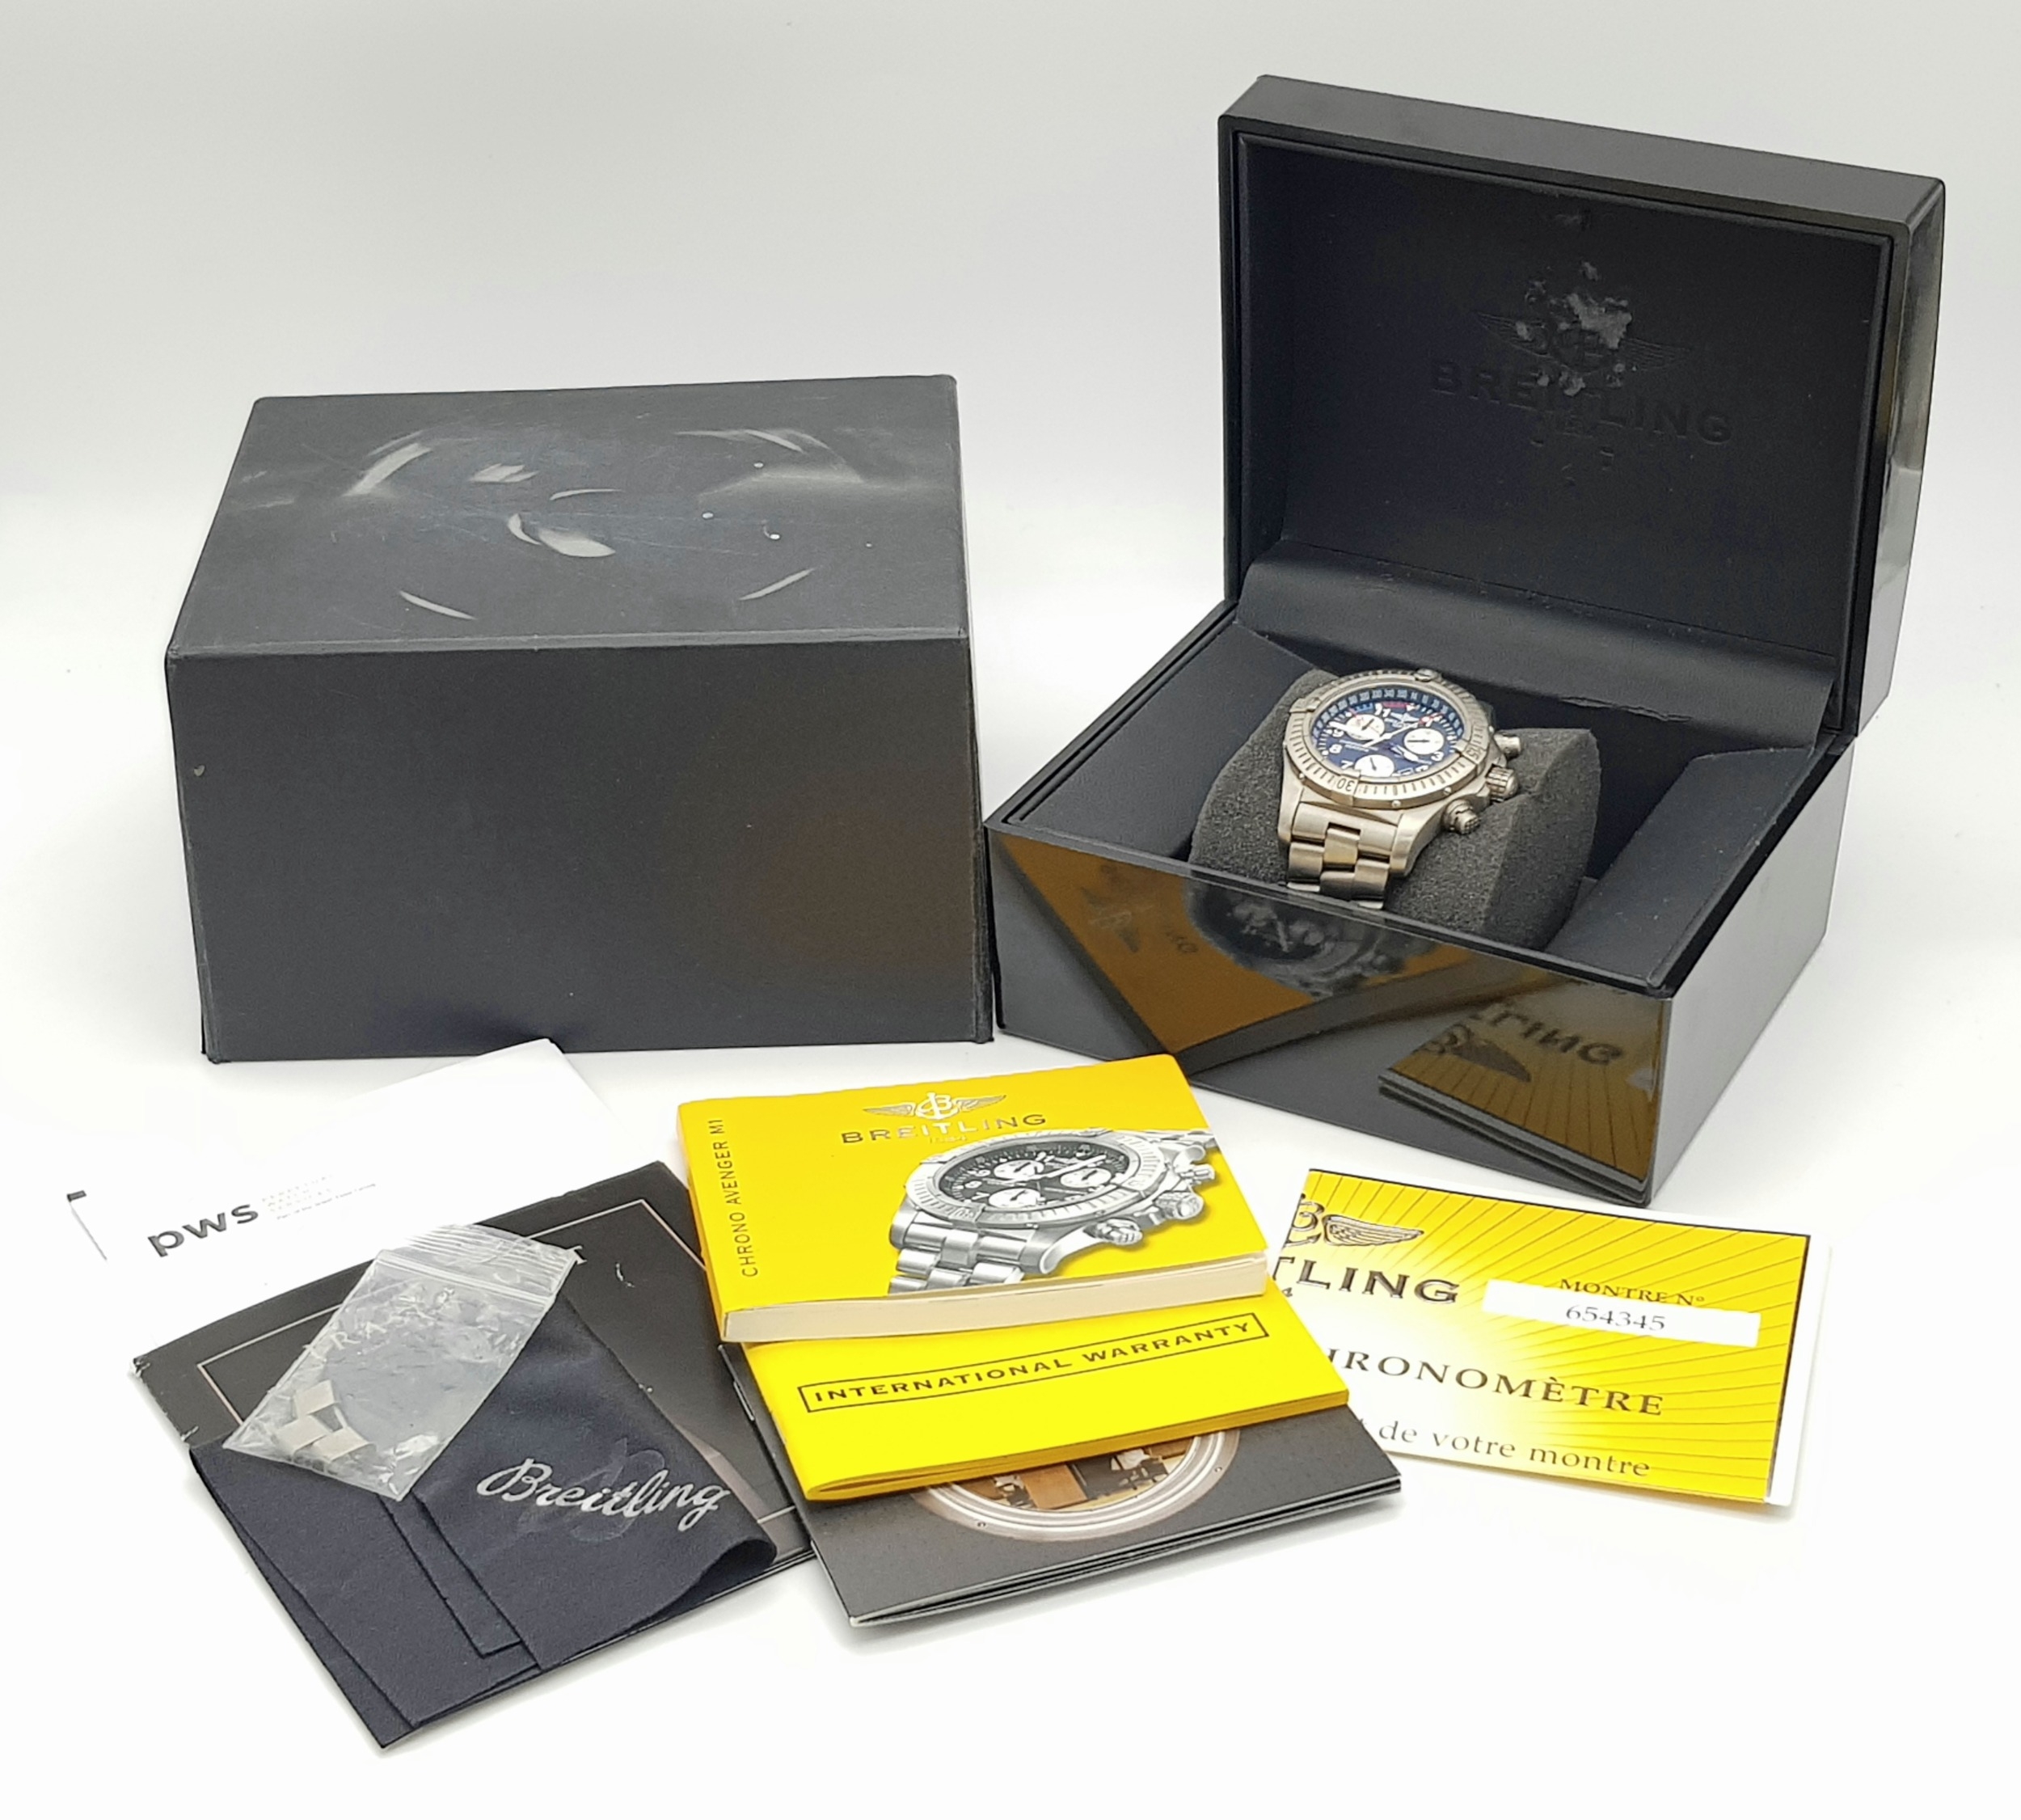 A BREITLING GTS CHRONOMETRE IN STAINLESS STEEL WITH BLUE FACE AND 3 SUBDIALS , AUTOMATIC - Image 7 of 10